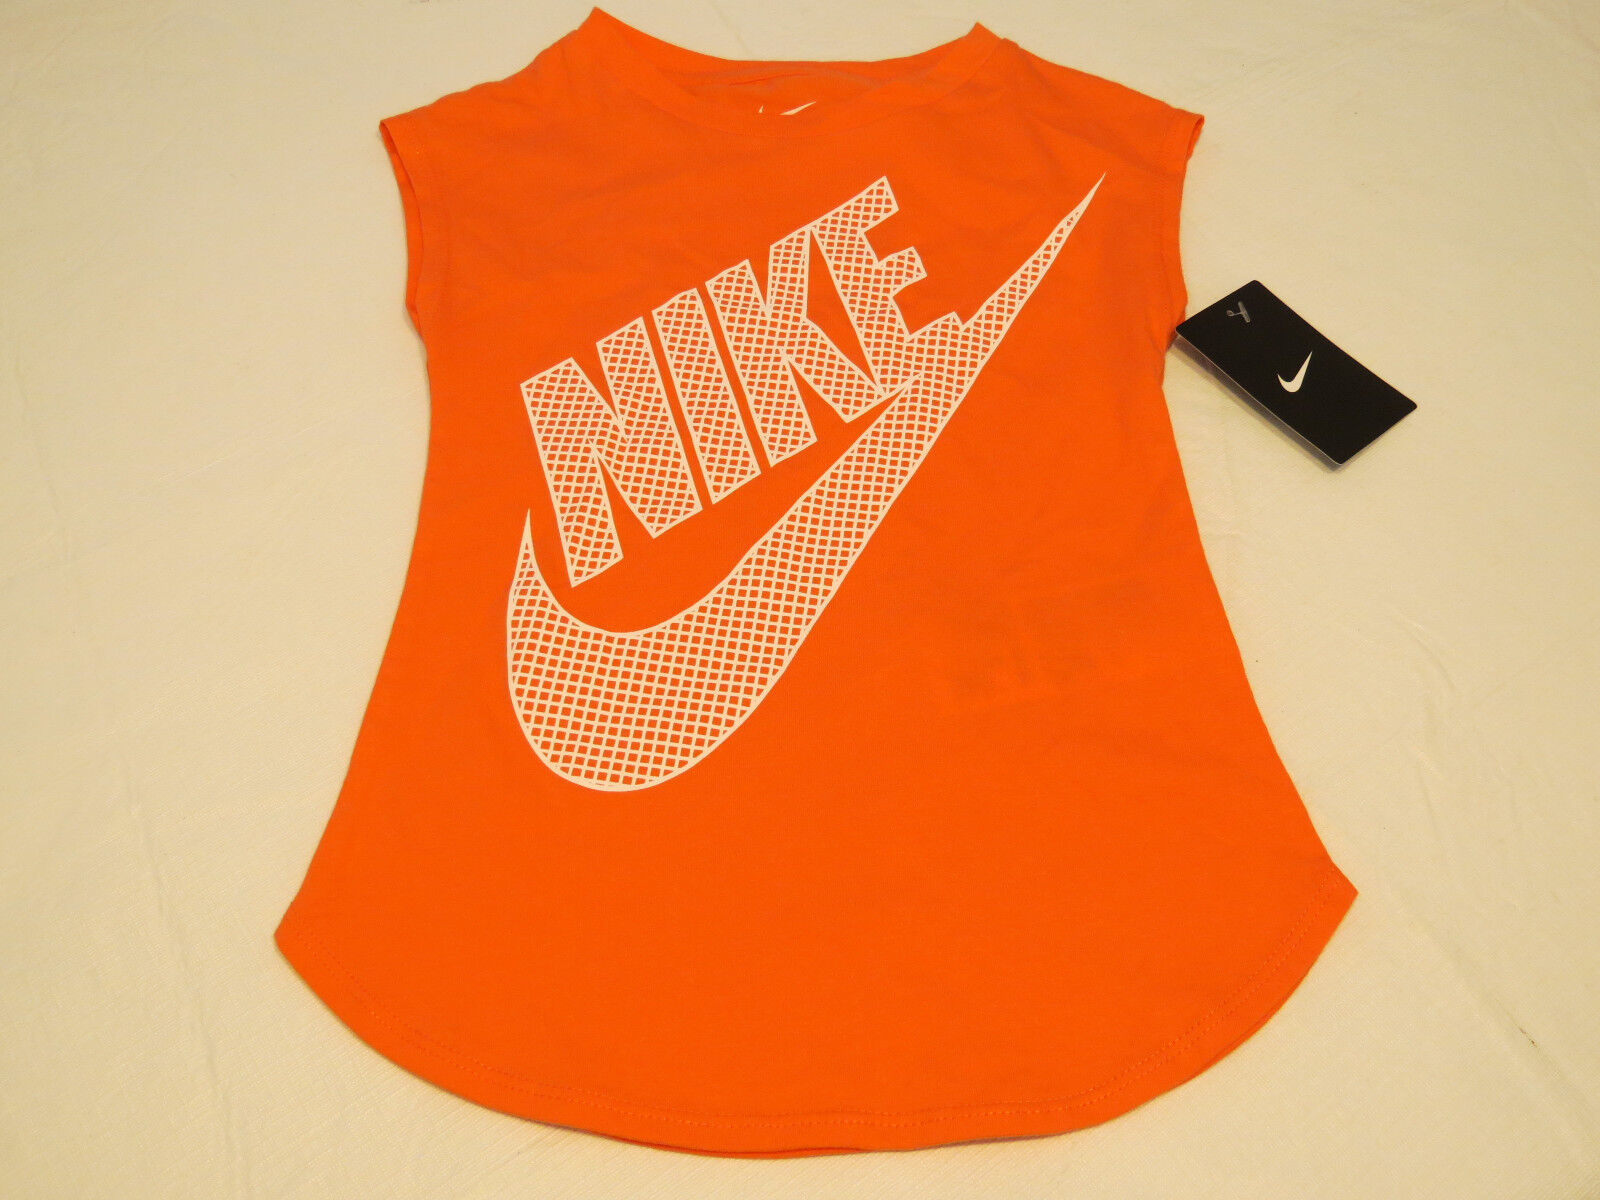 Primary image for Nike active The Nike TEE t shirt youth girls 4 3-4 years 3MA783 N50 mango NWT*^